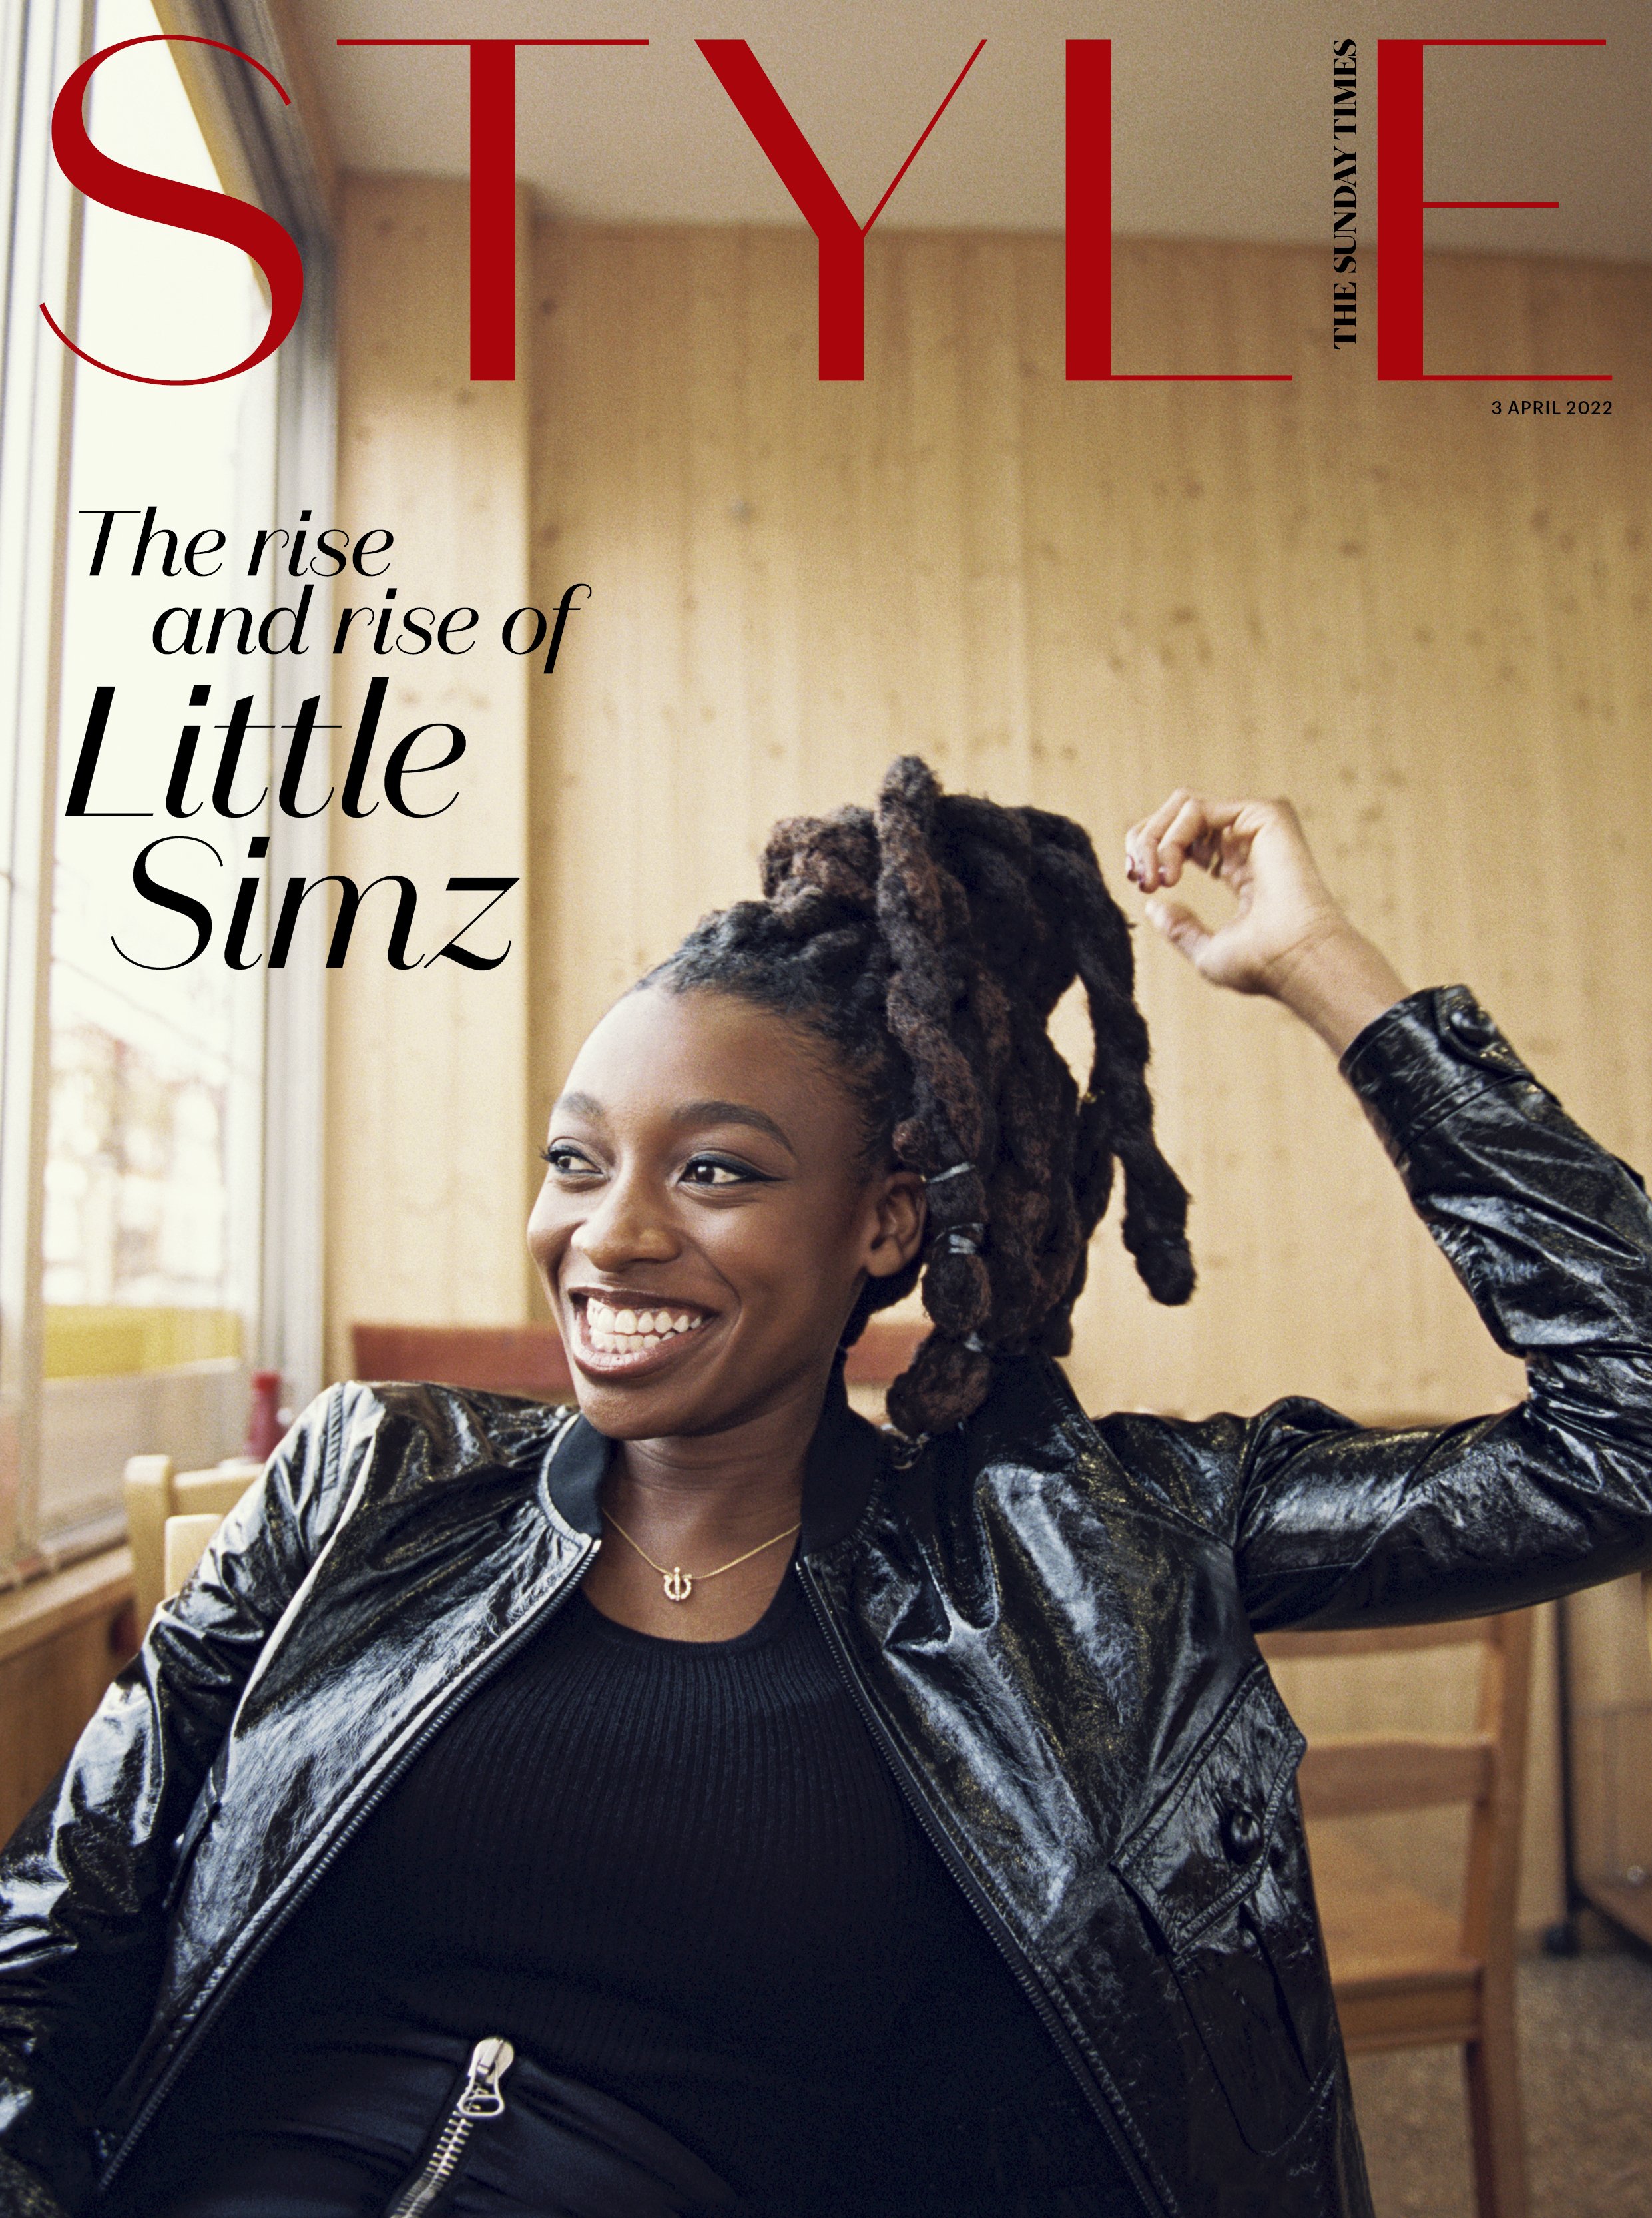 Little Simz for Sunday Times April 2022.